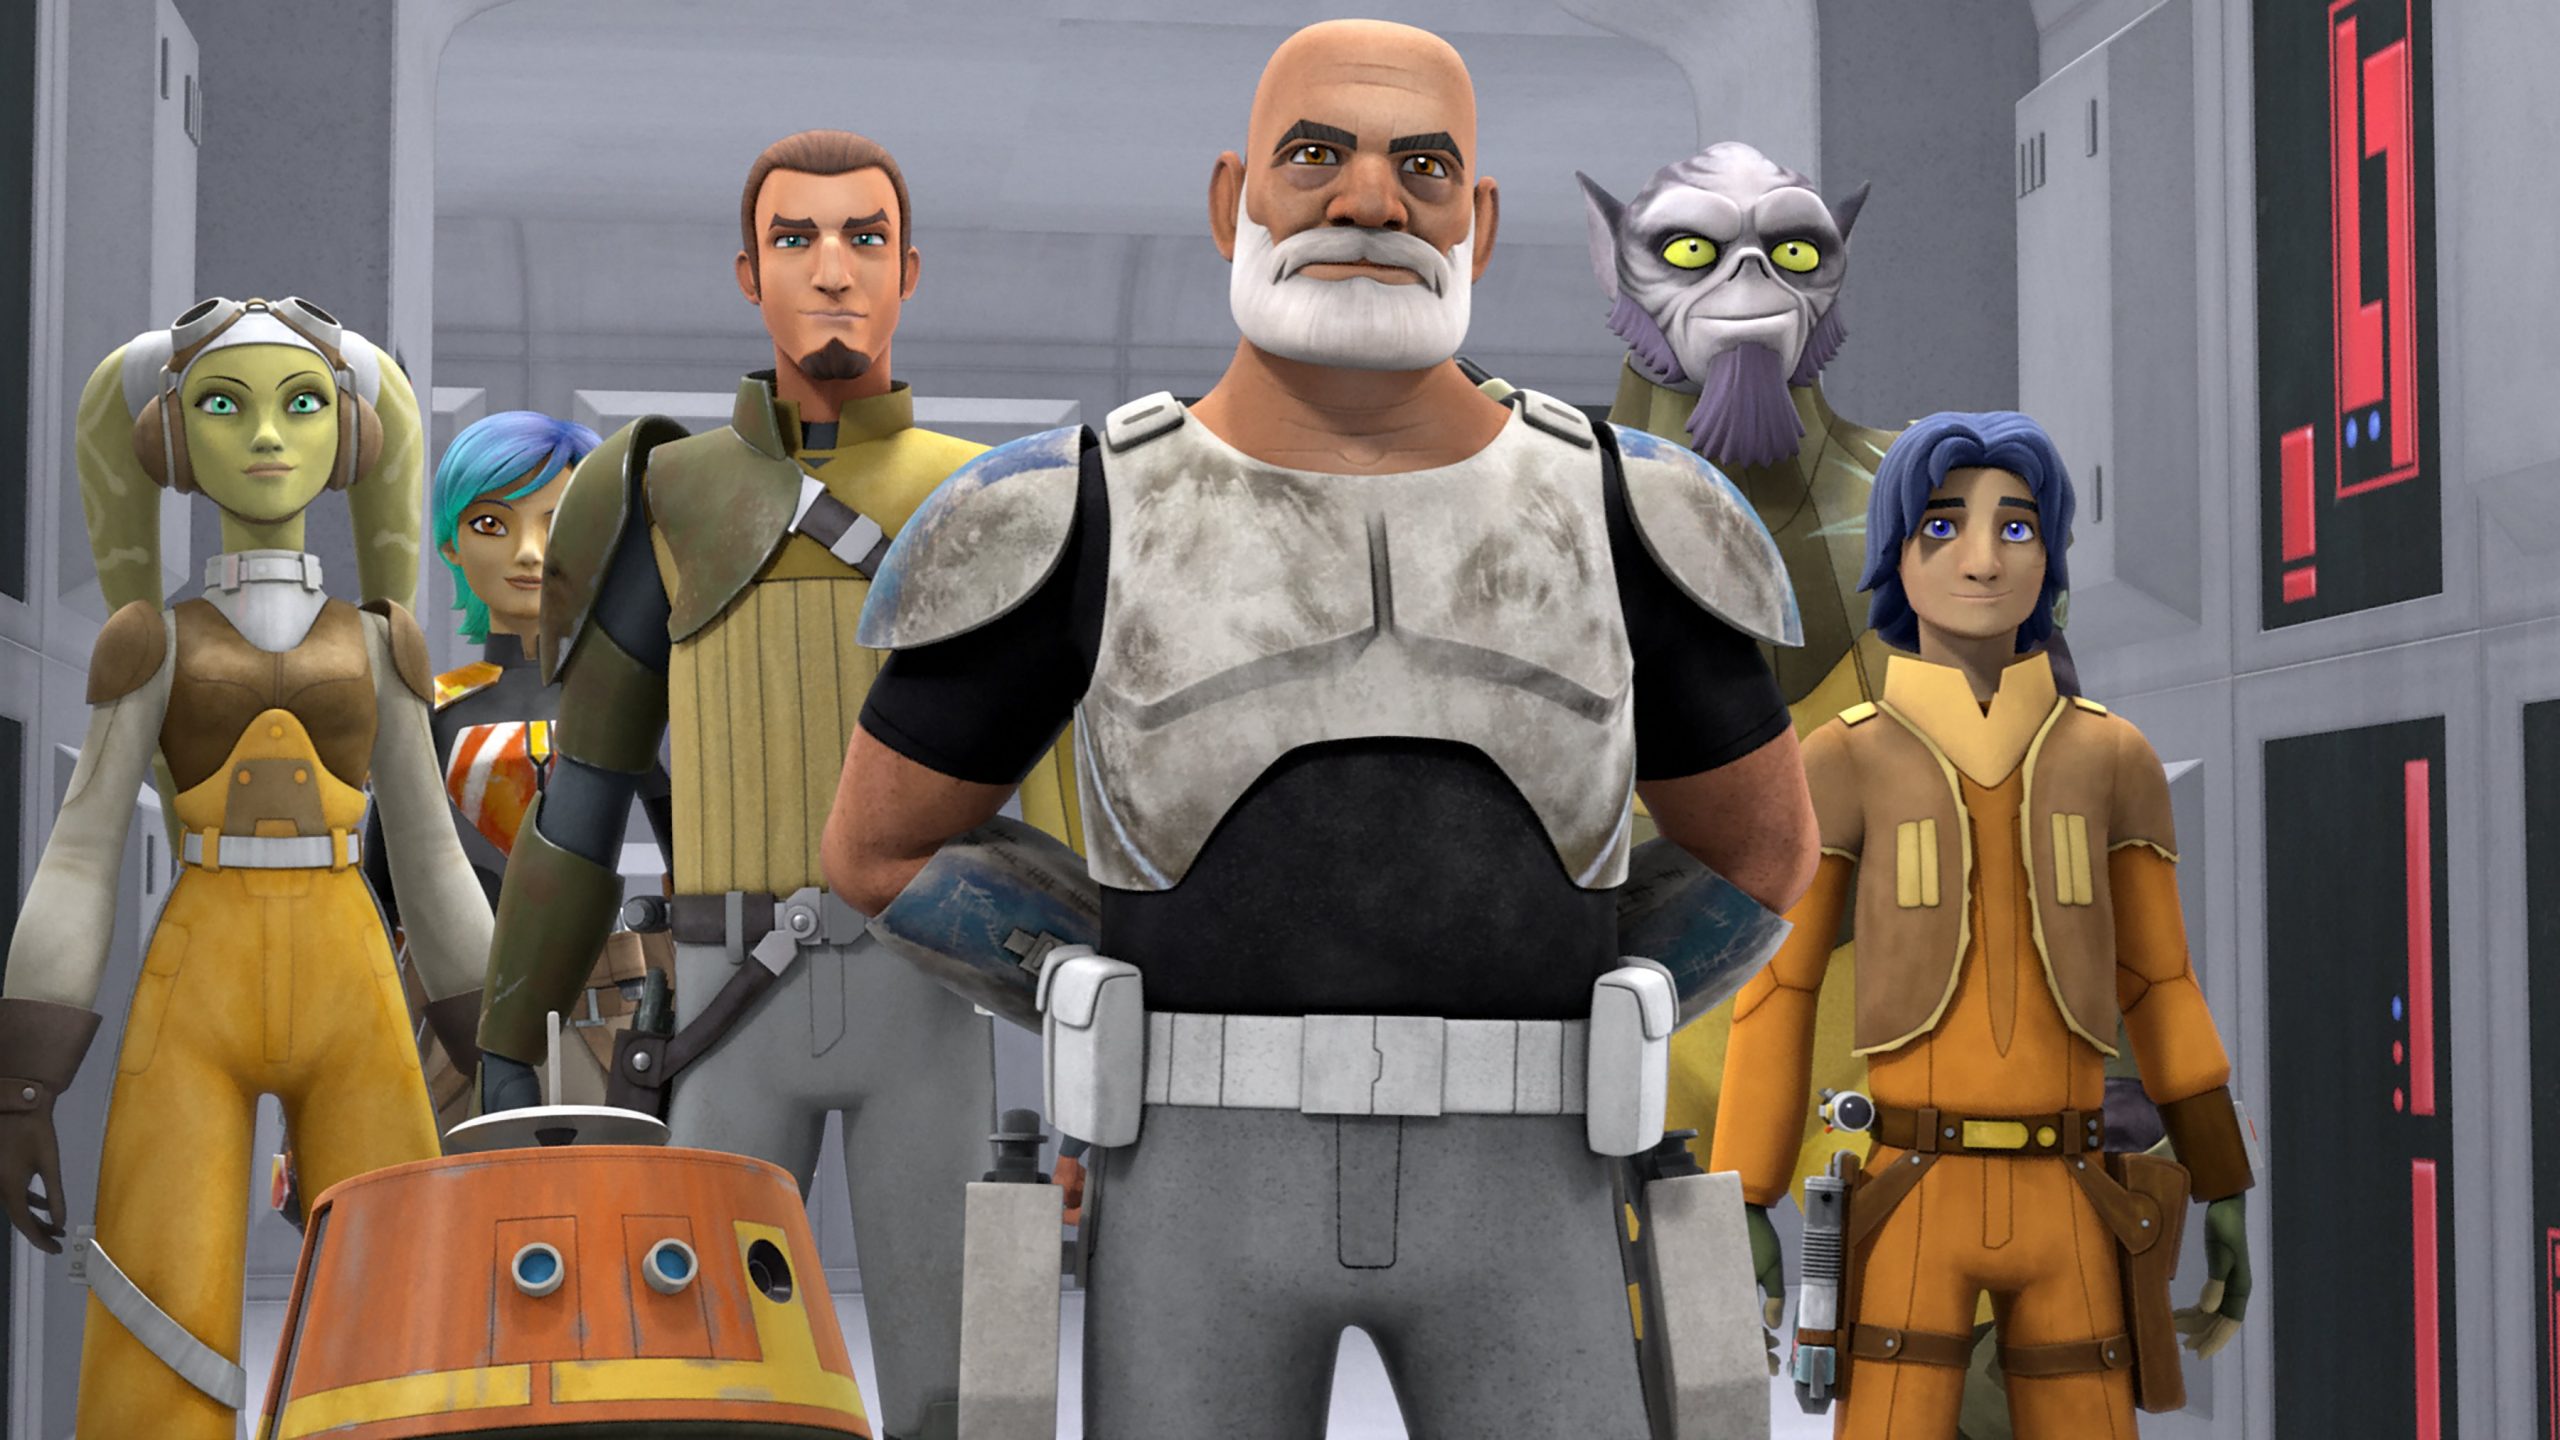 Where And When Can You See The Star Wars Rebels Season 2 Preview At New York Comic Con?